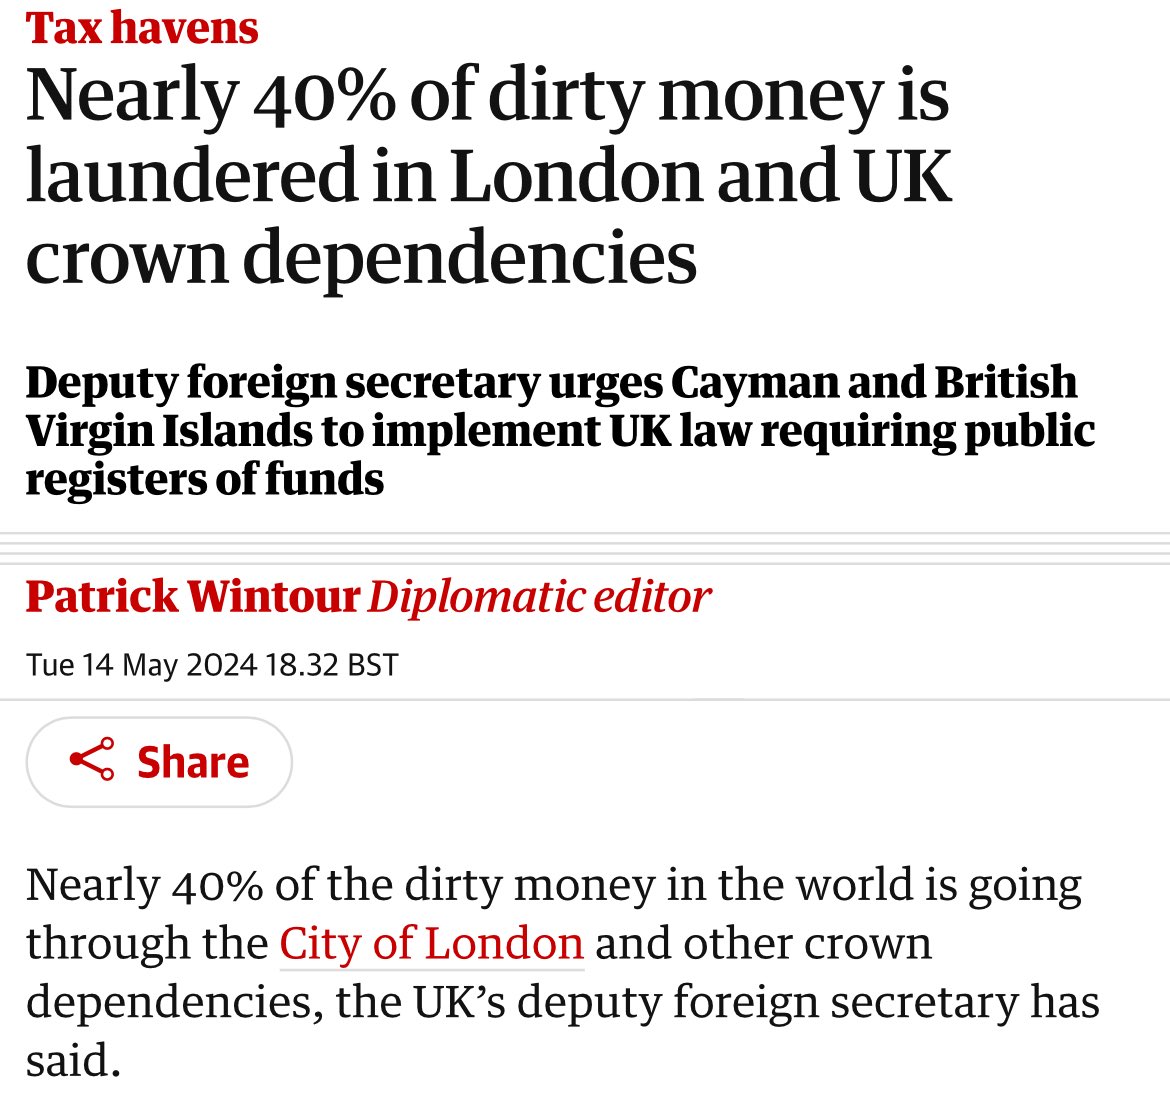 So proud! ❤️ 💪 Britain, take a bow. Nobody does money laundering like you. Don't let anyone tell you otherwise.